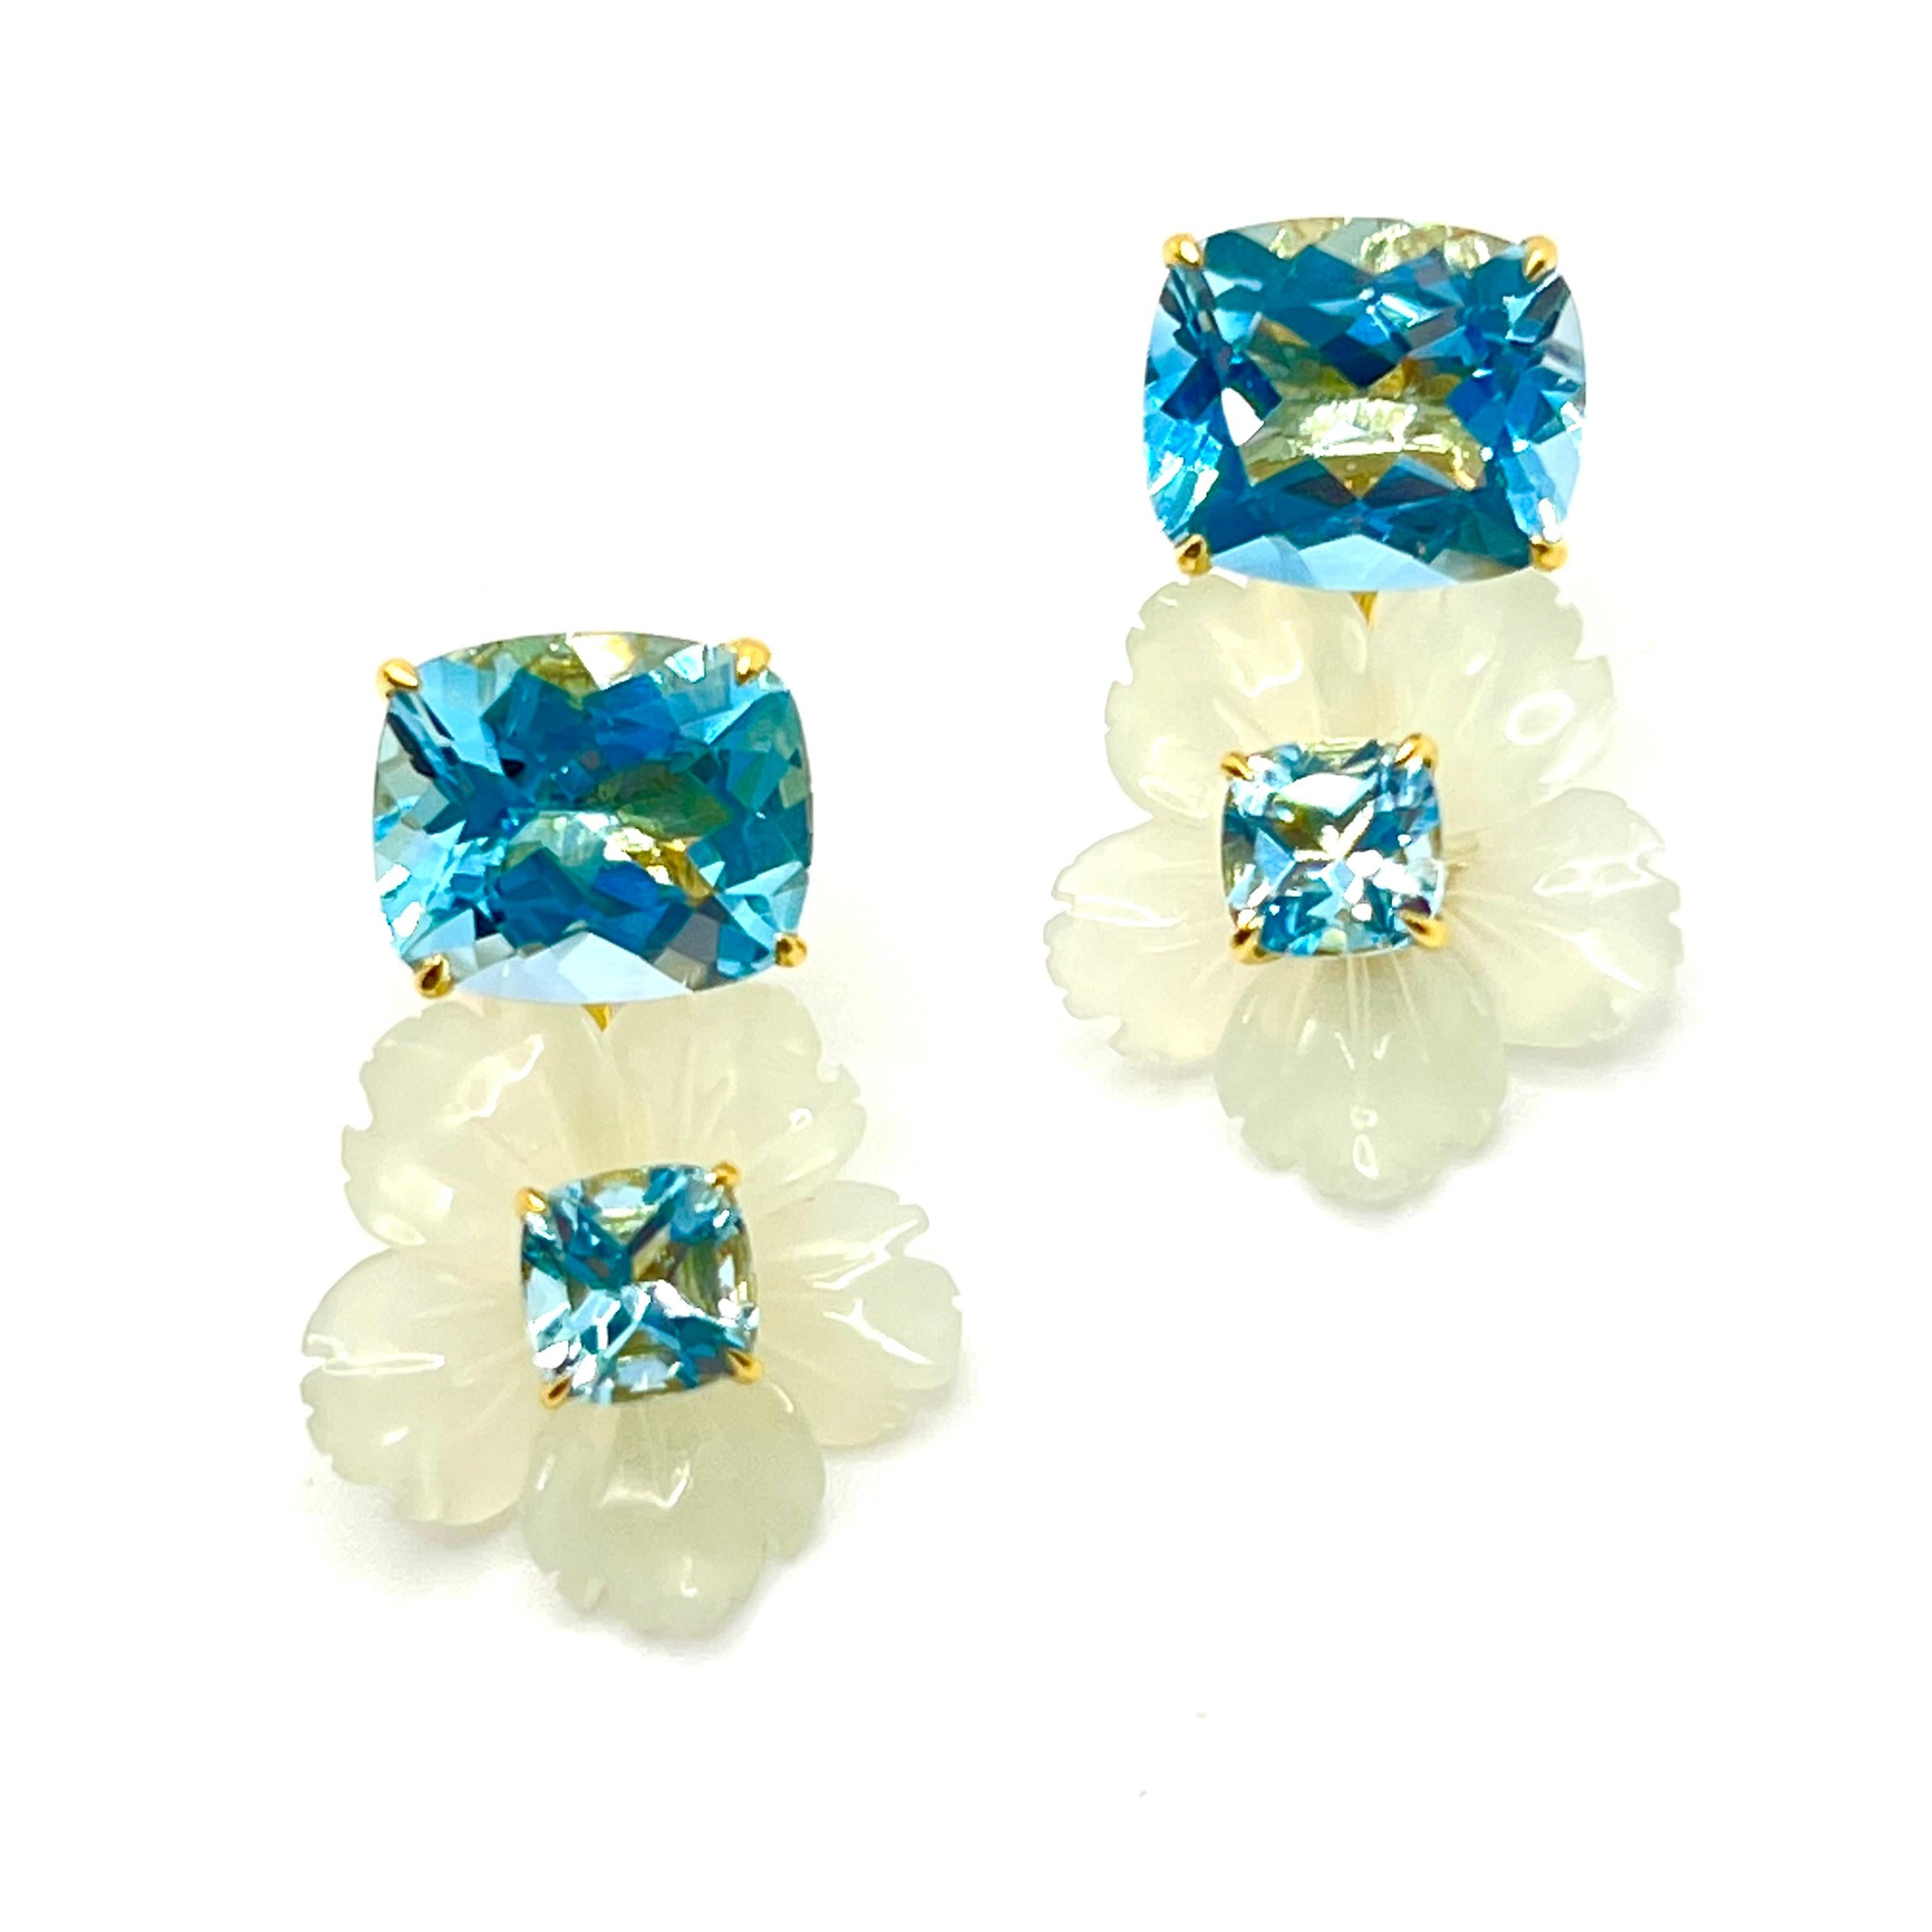 Mixed Cut Stunning Cushion-cut Blue Topaz and Carved Serpentine Flower Drop Earrings For Sale